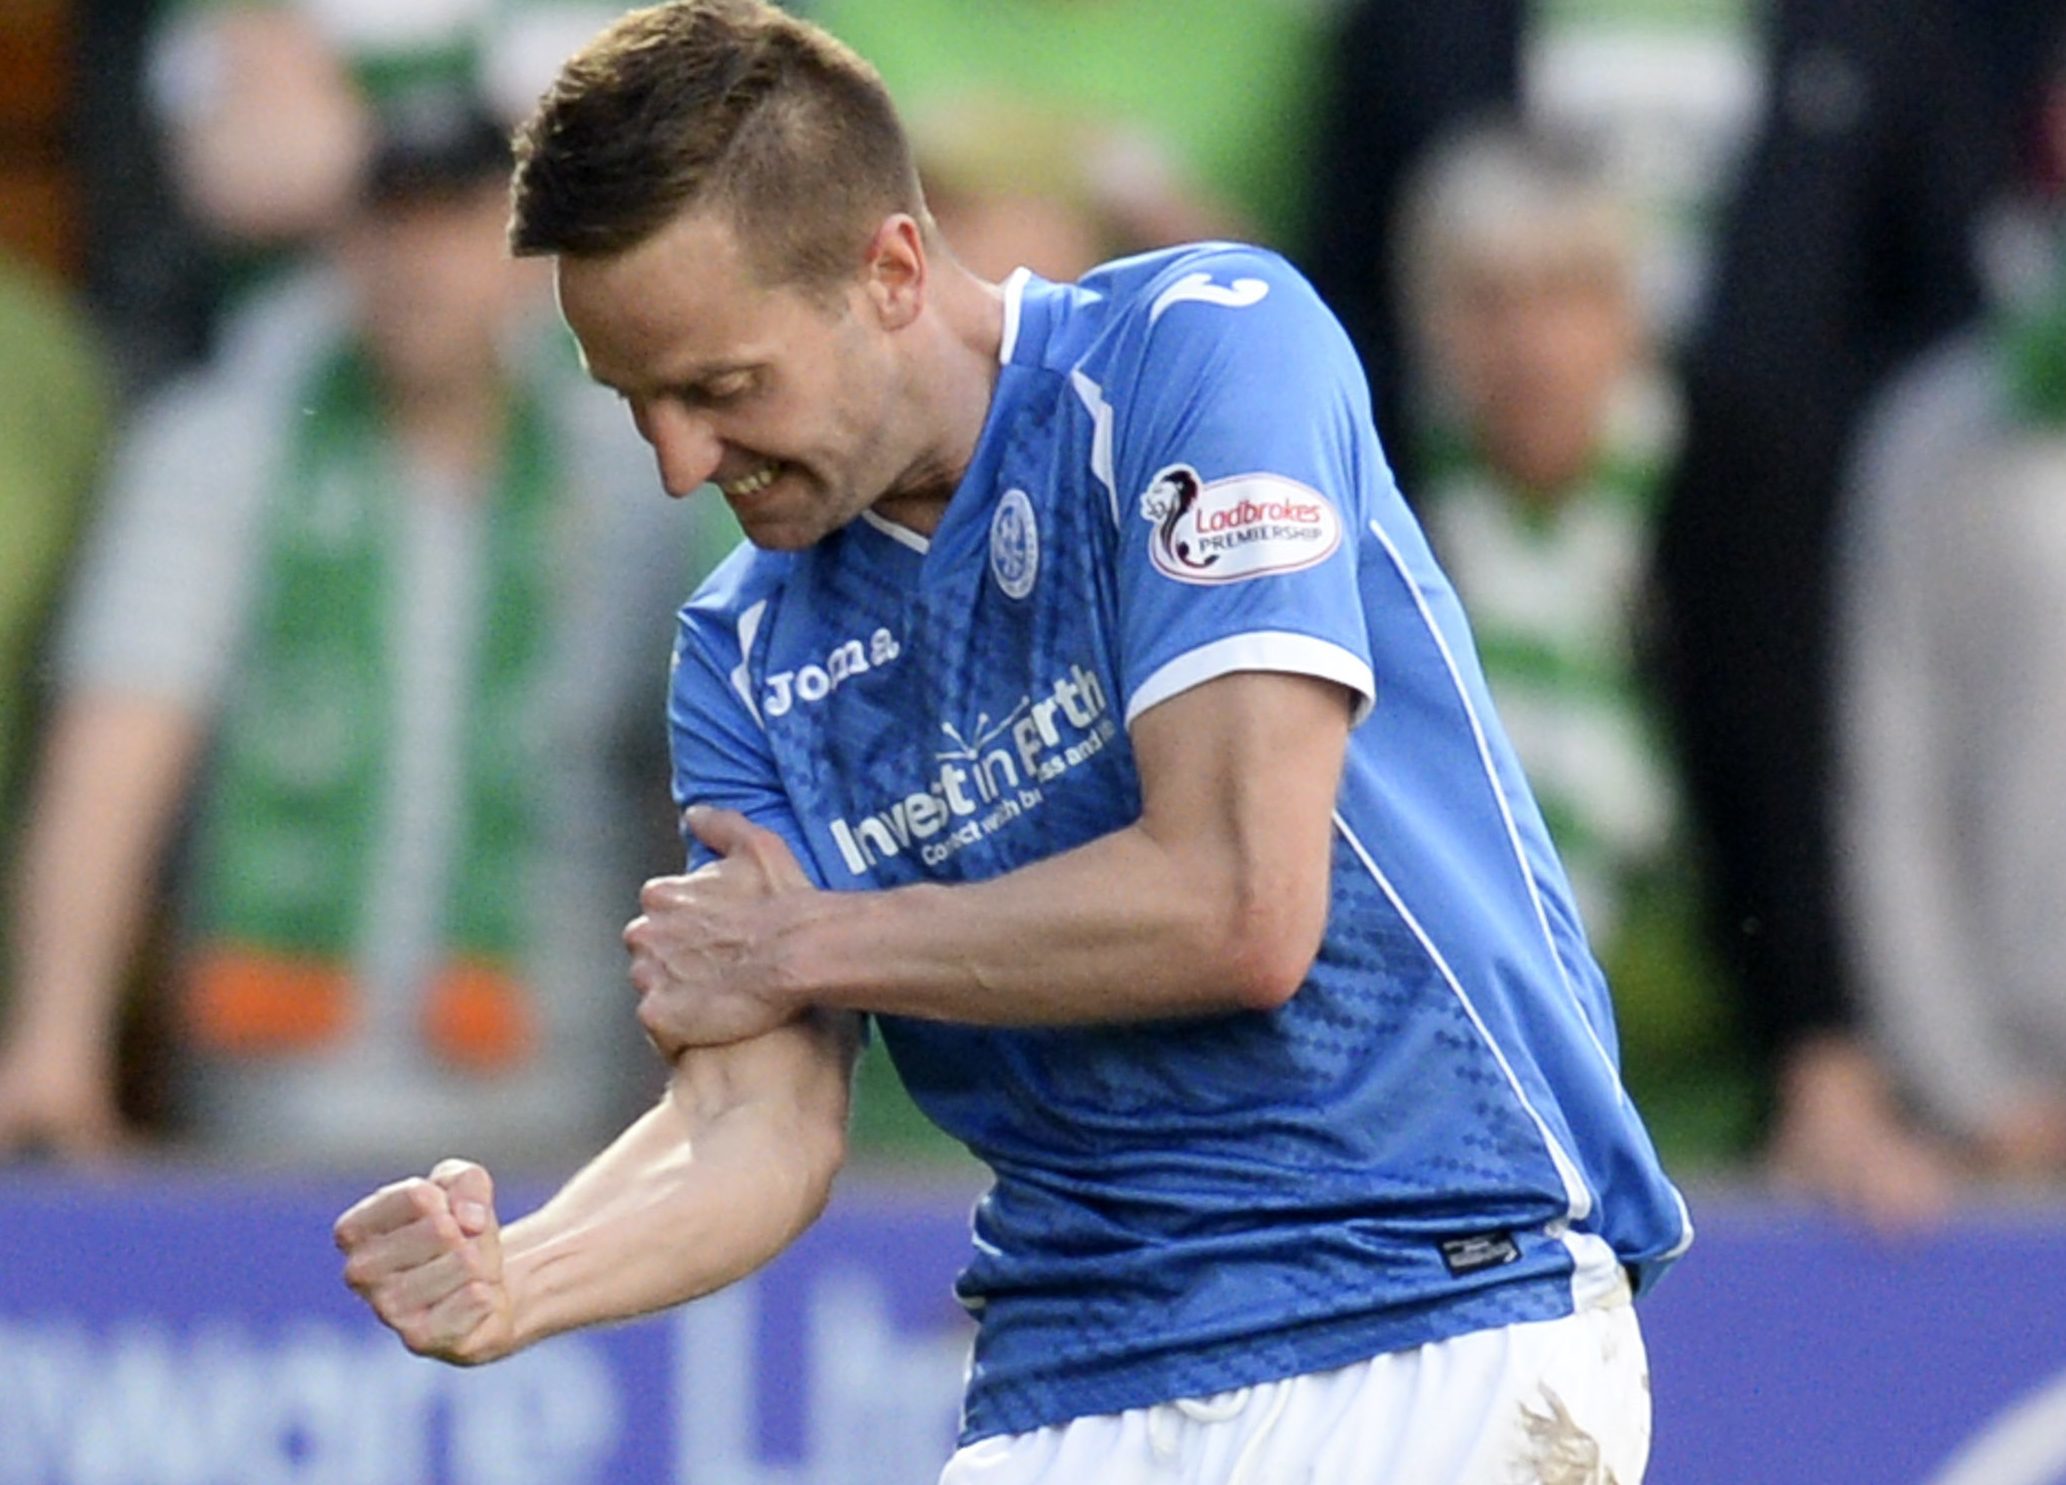 St Johnstone fans won't be seeing this celebration again.